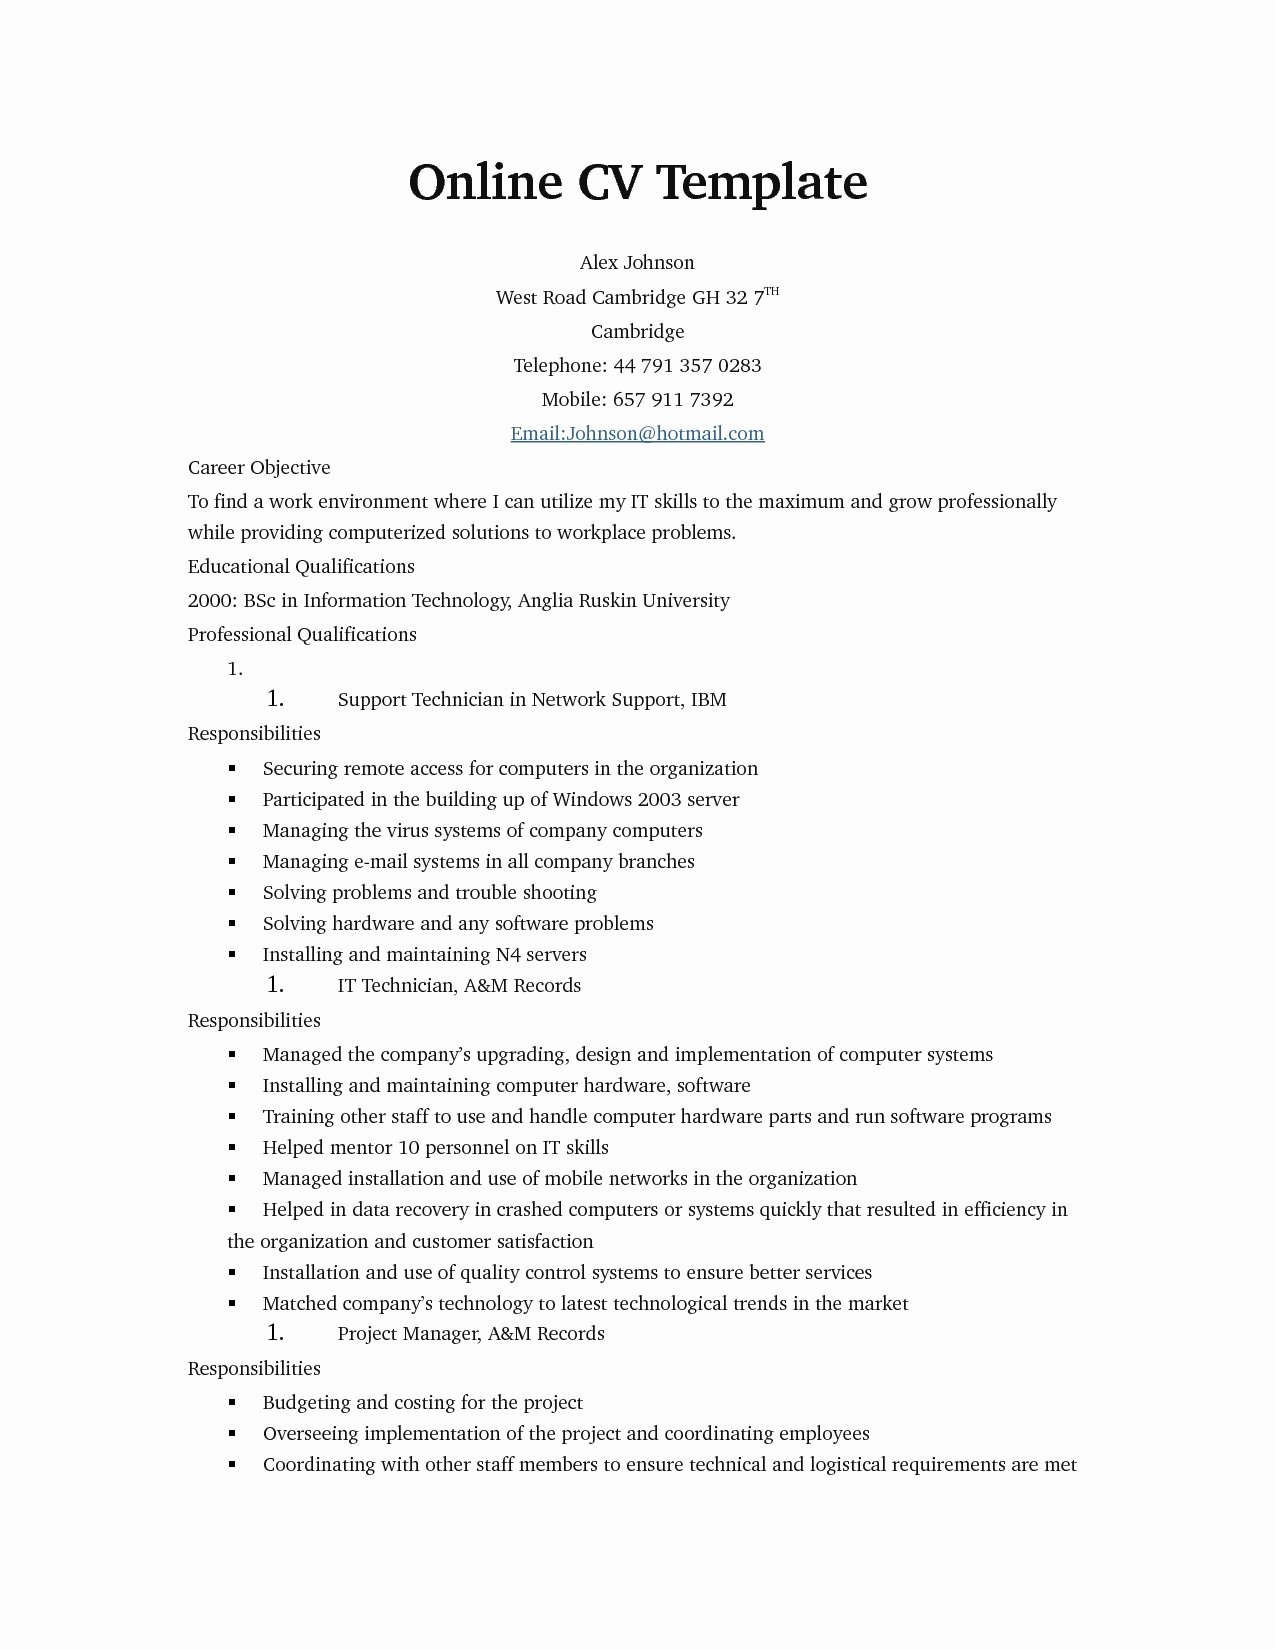 Resume Template Microsoft Word 2003 Awesome Free Resume Templates Microsoft Word 2003 Picture